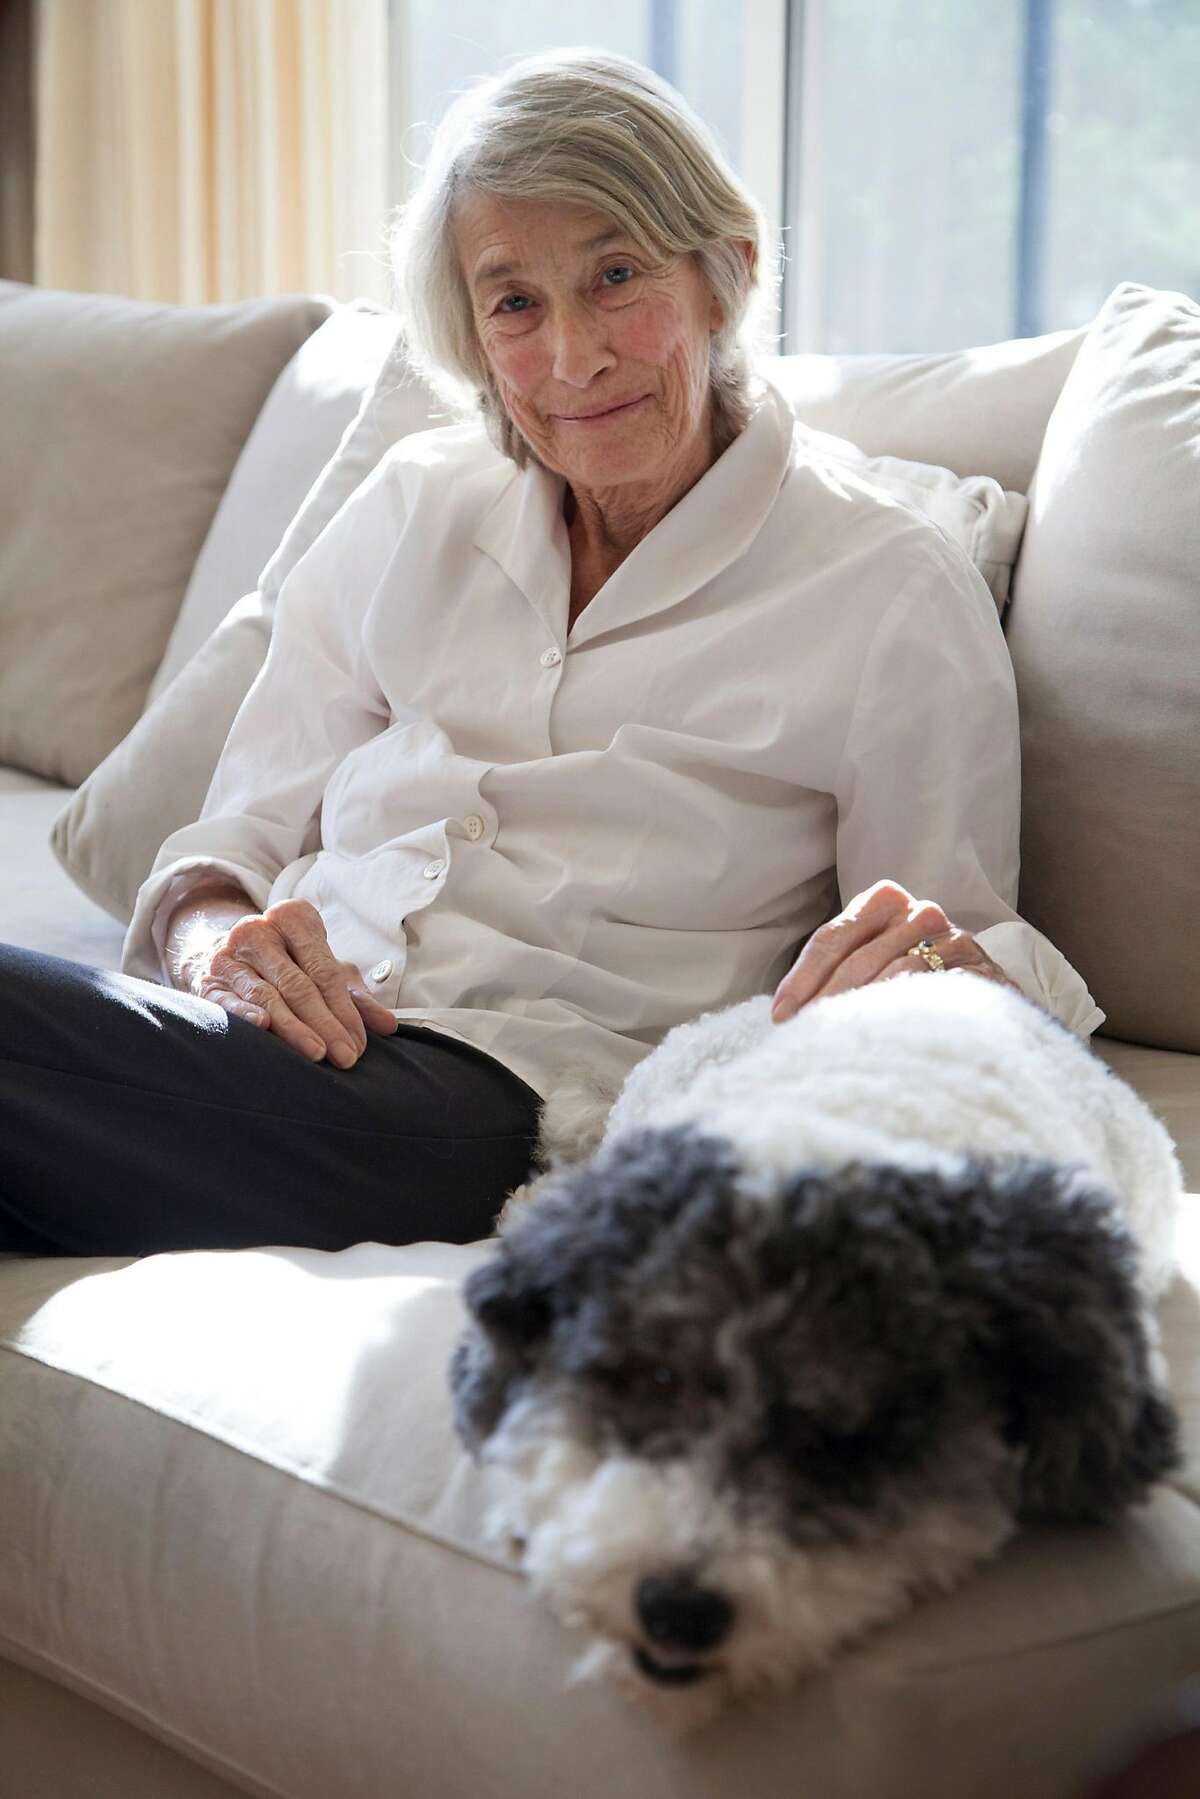 FILE -- Mary Oliver, a Pulitzer Prize-winning poet, with her dog, Ricky, at her home in Hobe Sound, Fla., Sept. 26, 2013. Oliver, whose work, with its plain language and minute attention to the natural world, drew a wide following while dividing critics, died on Jan. 17, 2019, at her home in Hobe Sound, Fla. She was 83. (Angel Valentine/The New York Times)